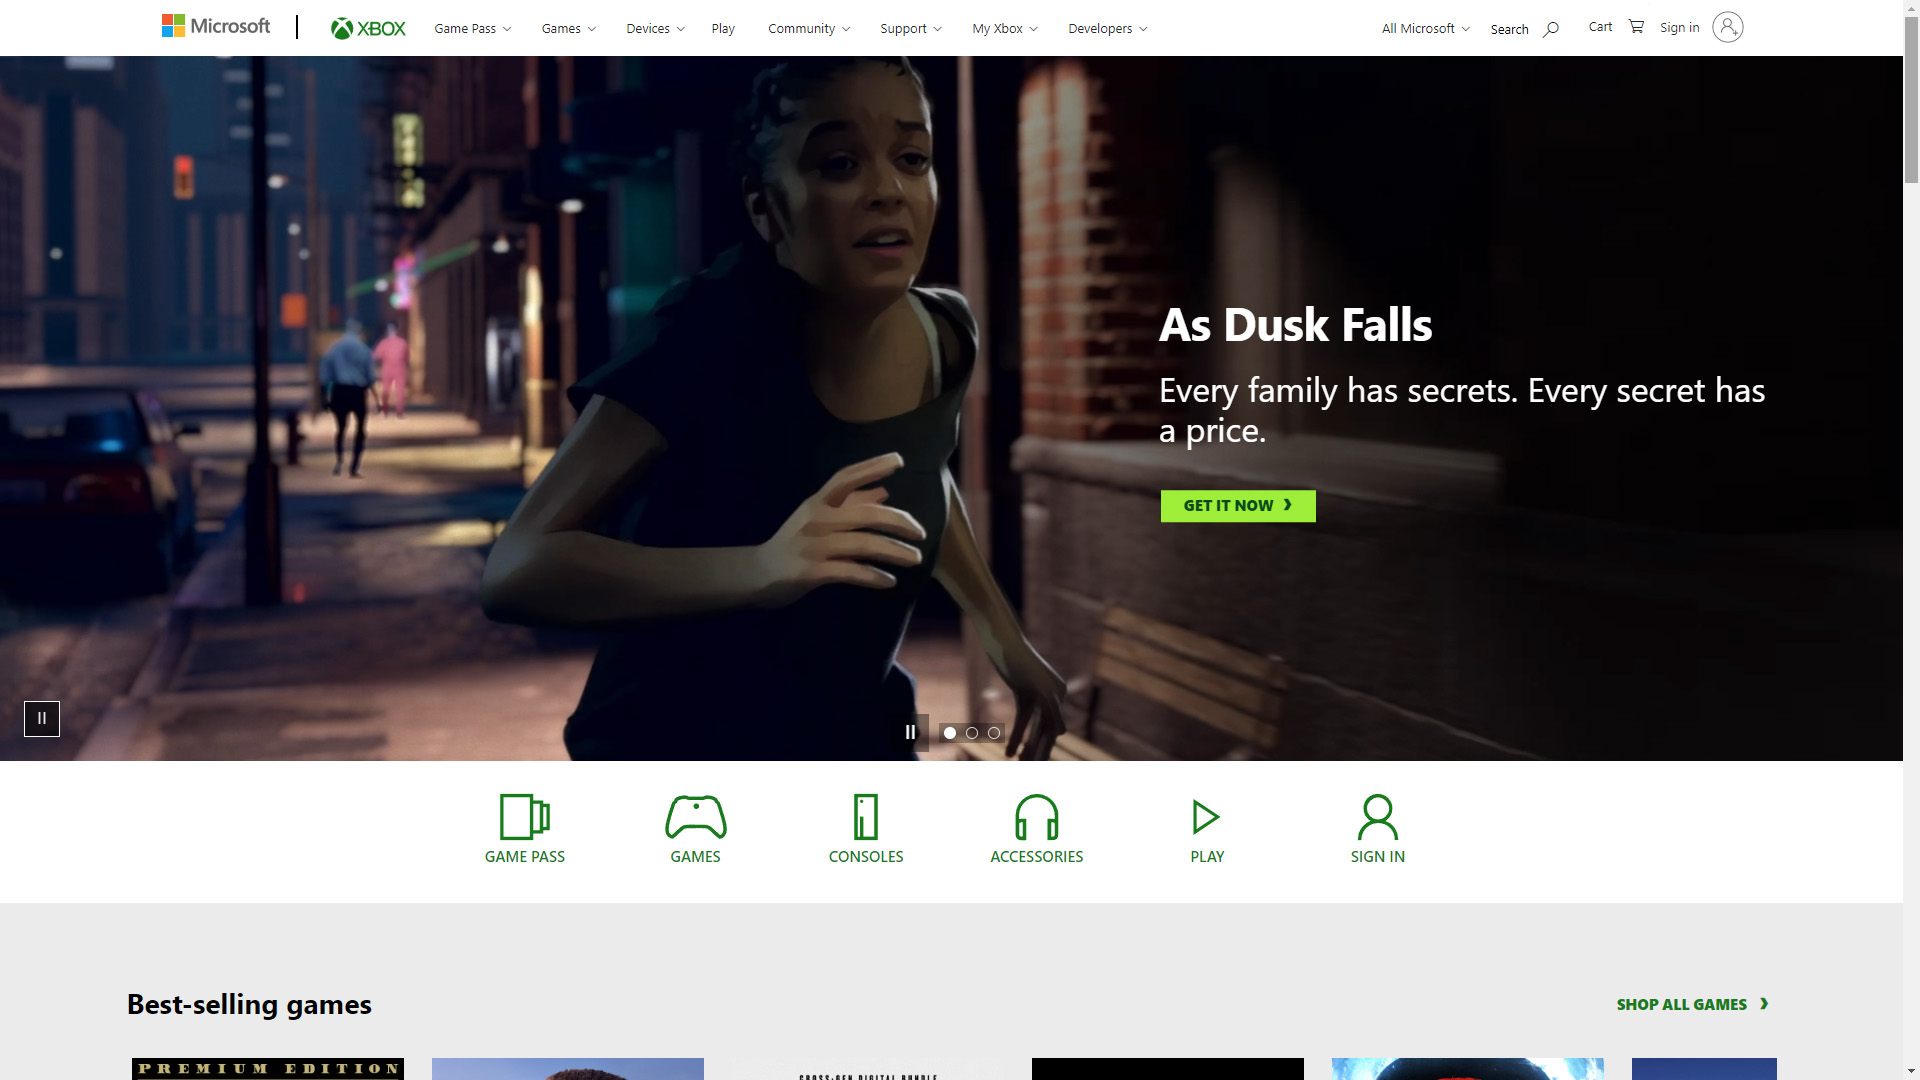 A screenshot from the game As Dusk Falls is centered on the homepage of xbox.com